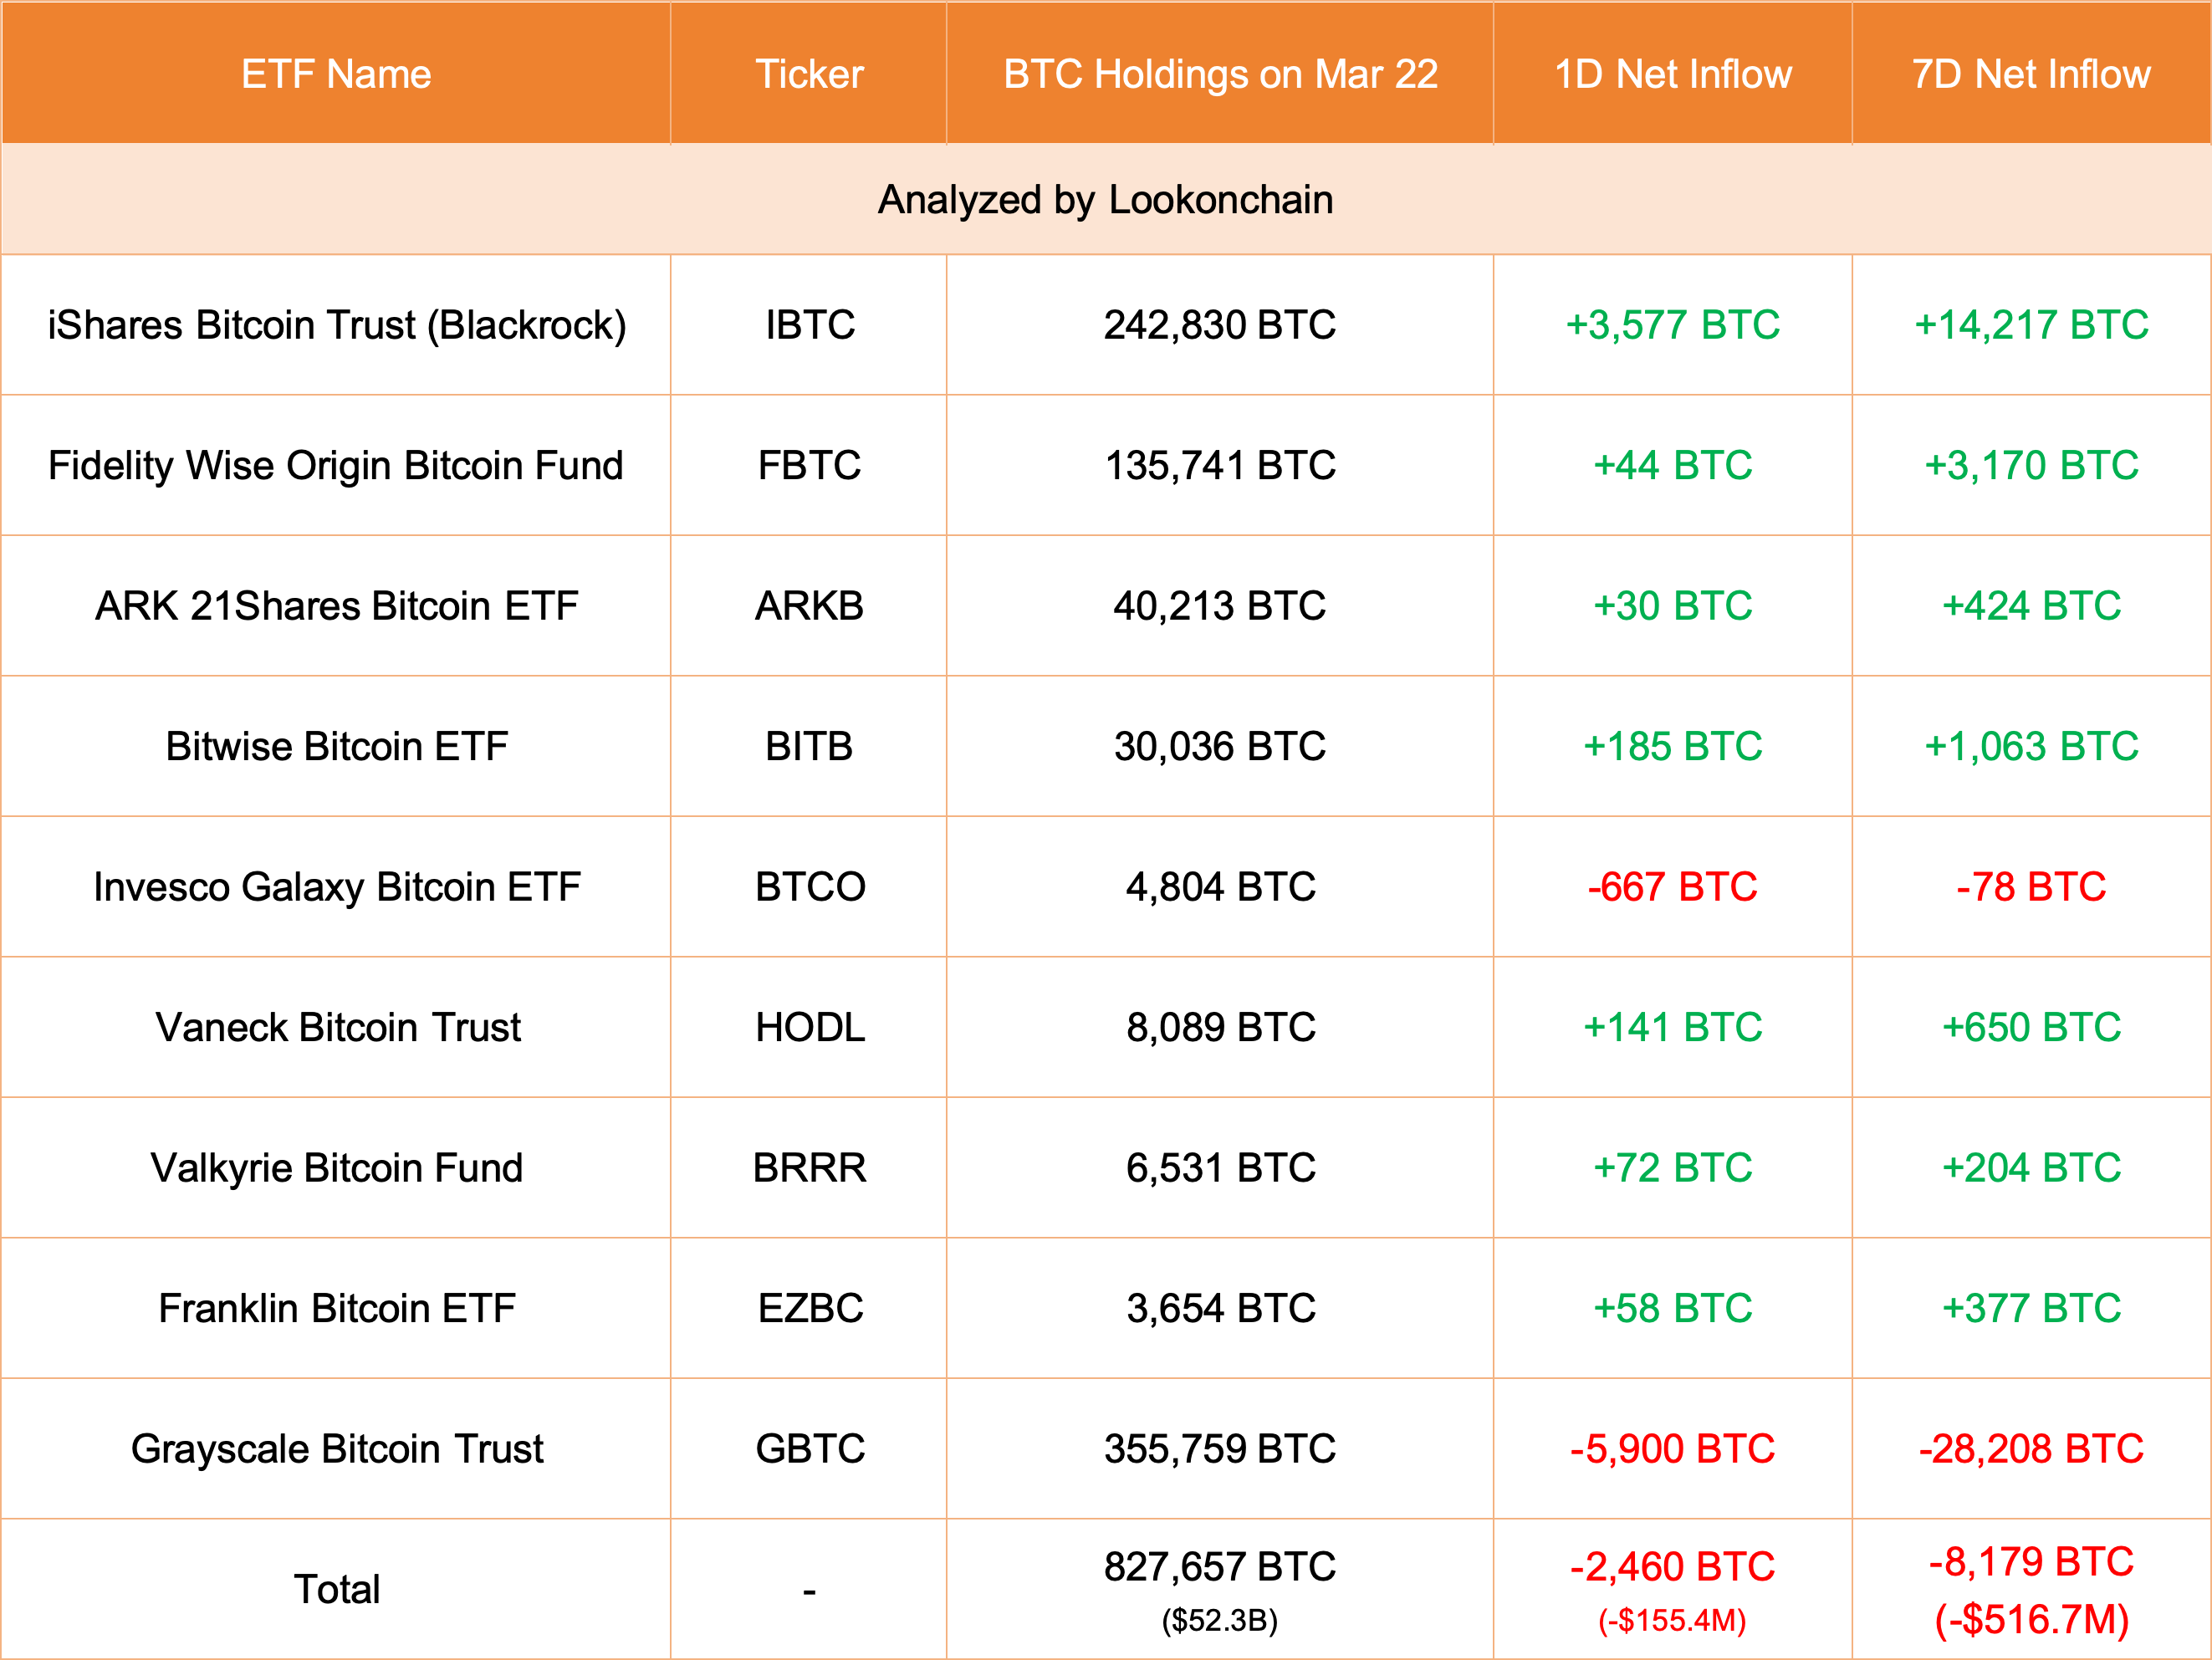 On March 22, Bitcoin spot ETF had a net outflow of approximately US5 million.(图1)